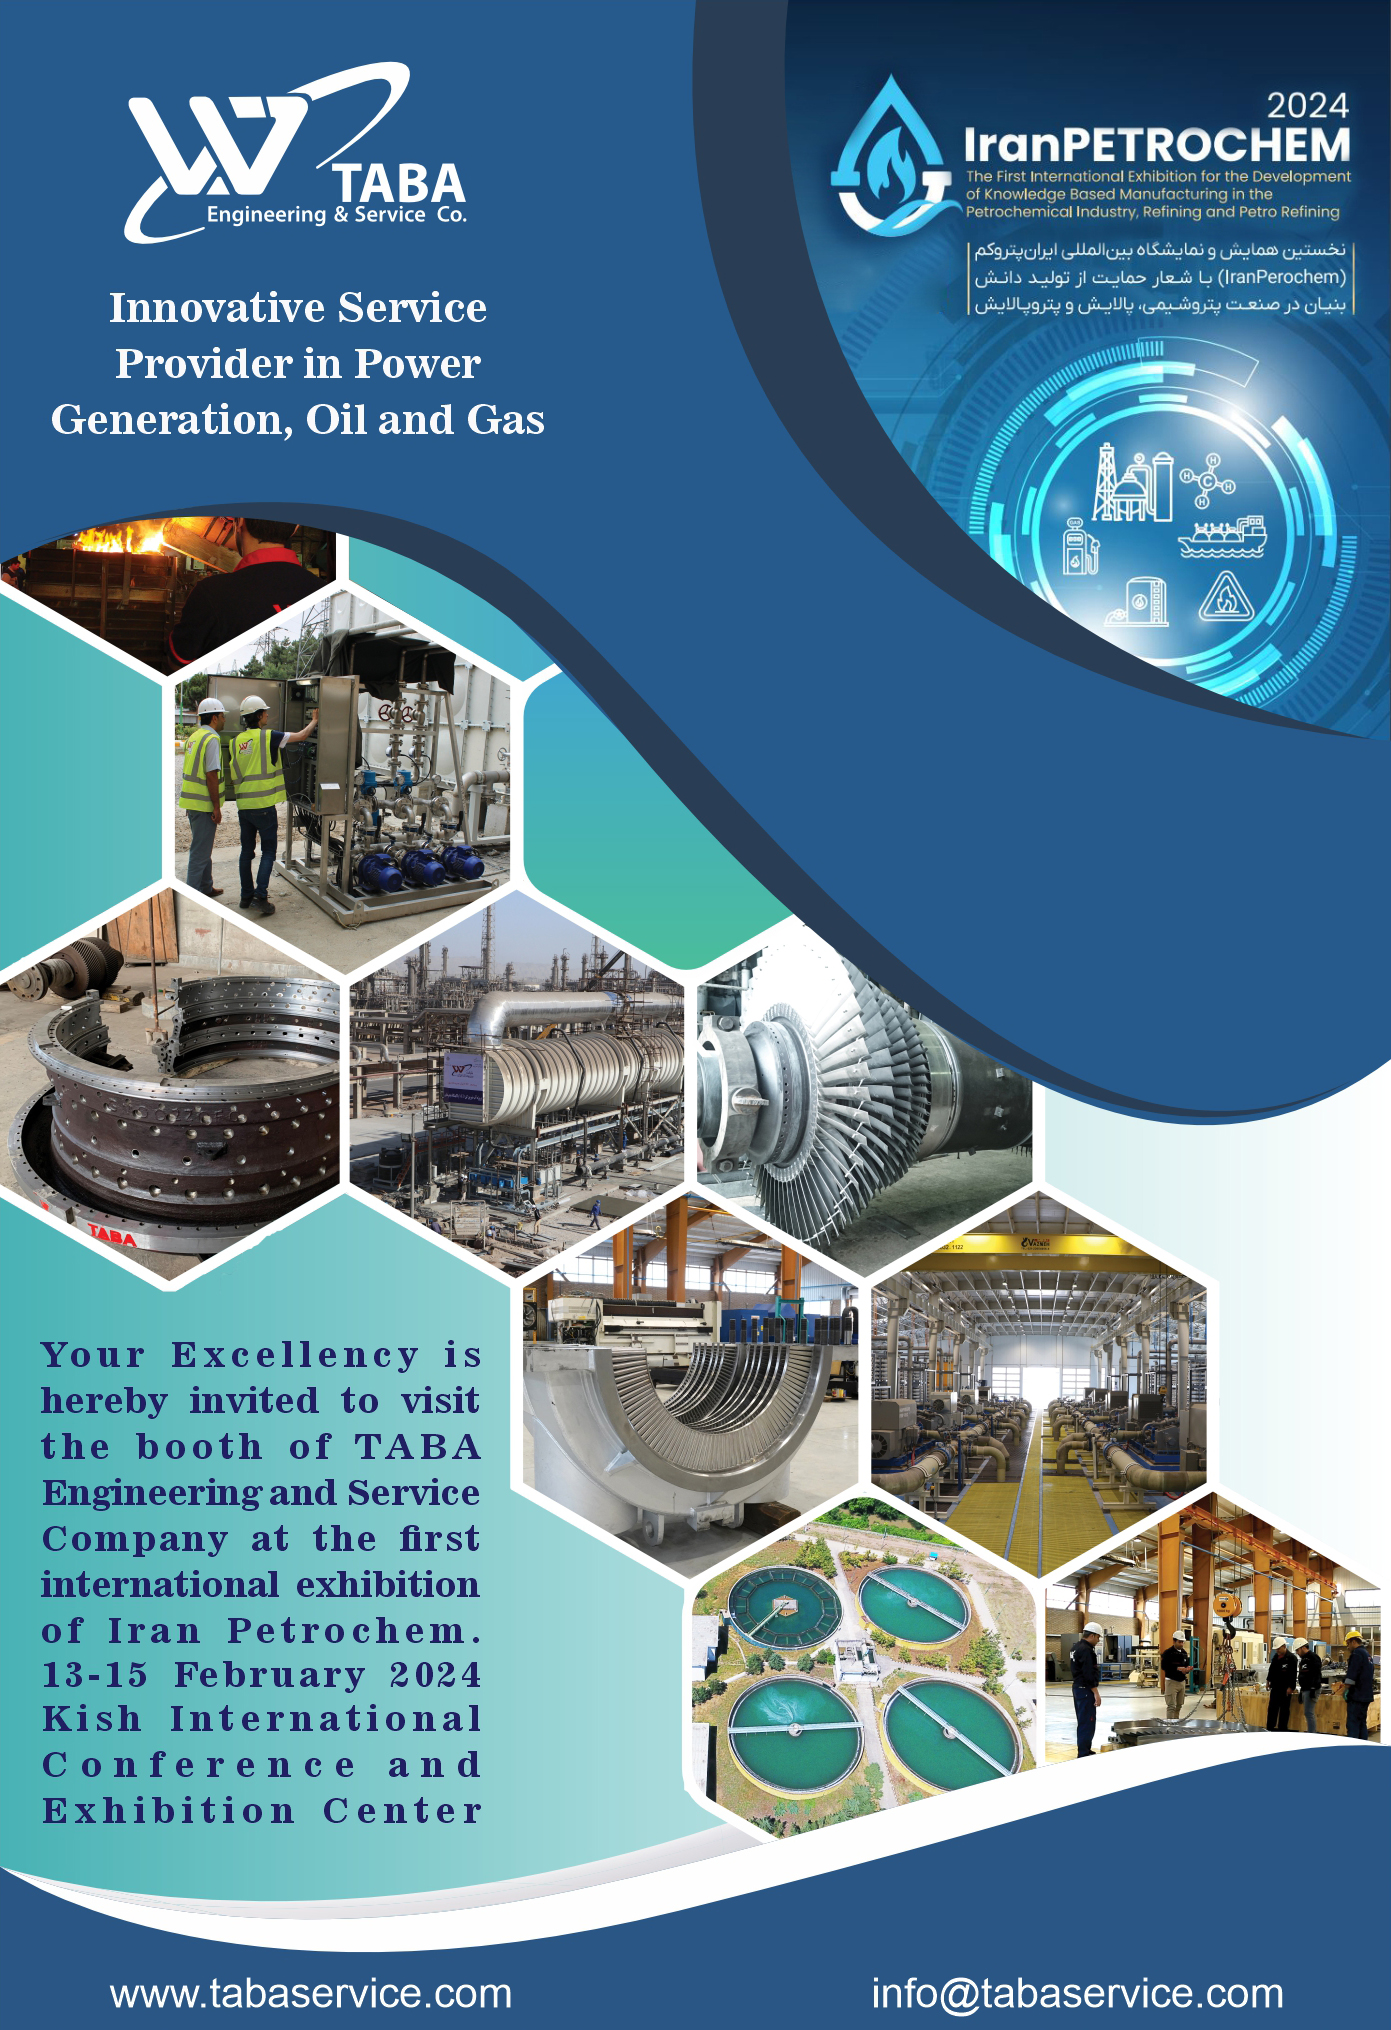 The presence of TABA company in the first International Exhibition of Iran Petrochem